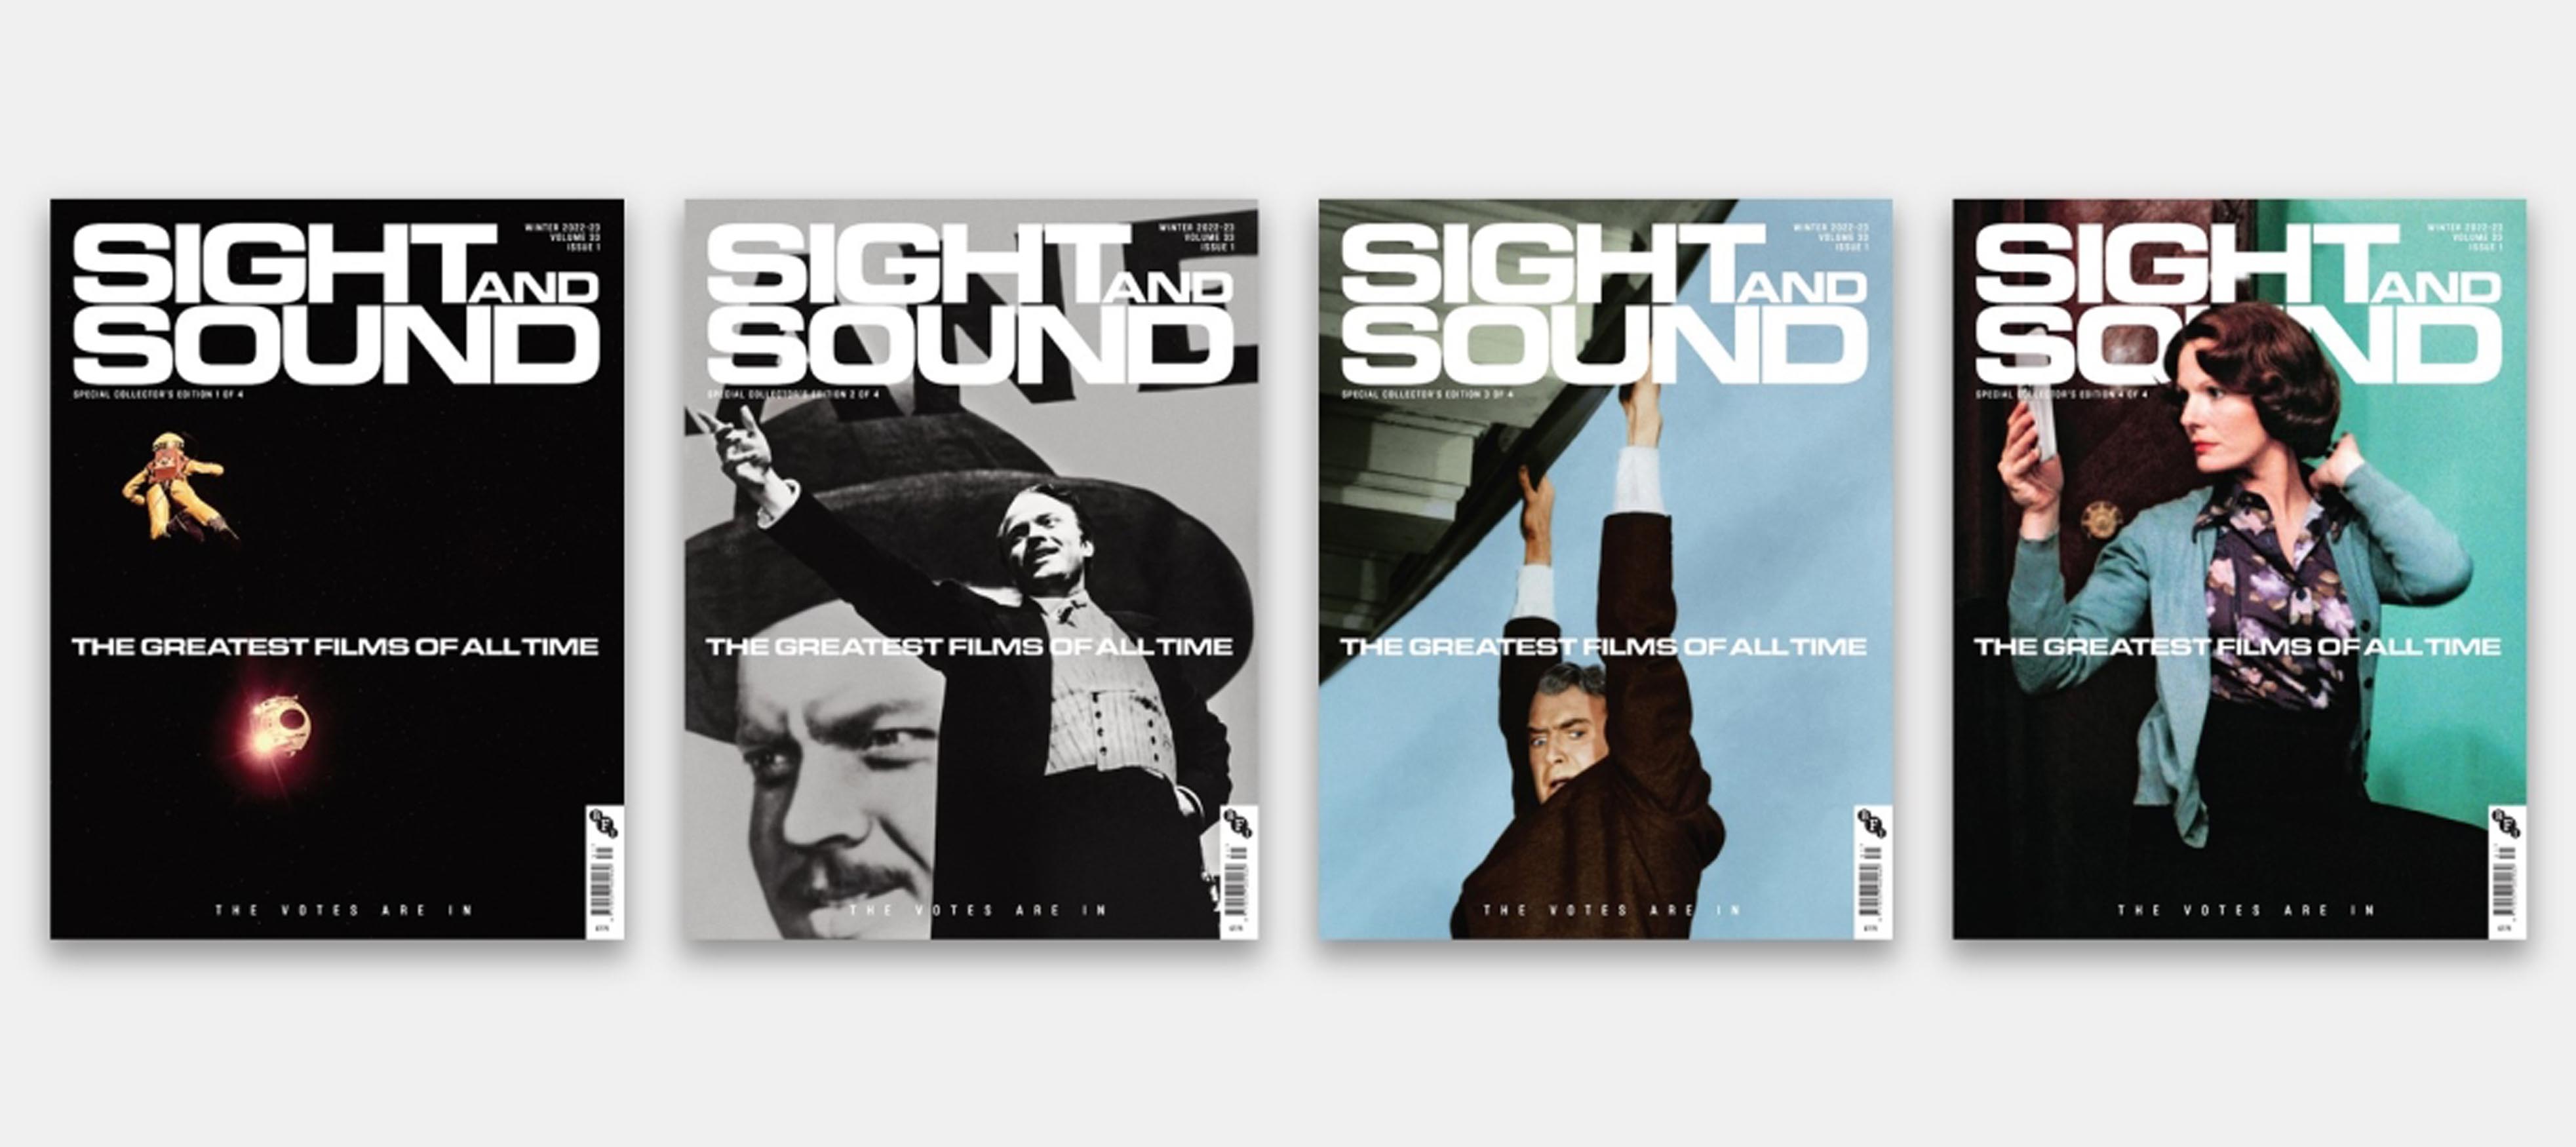 BFI Shop - Sight and Sound Greatest Films of All Time - DVD & Blu-ray